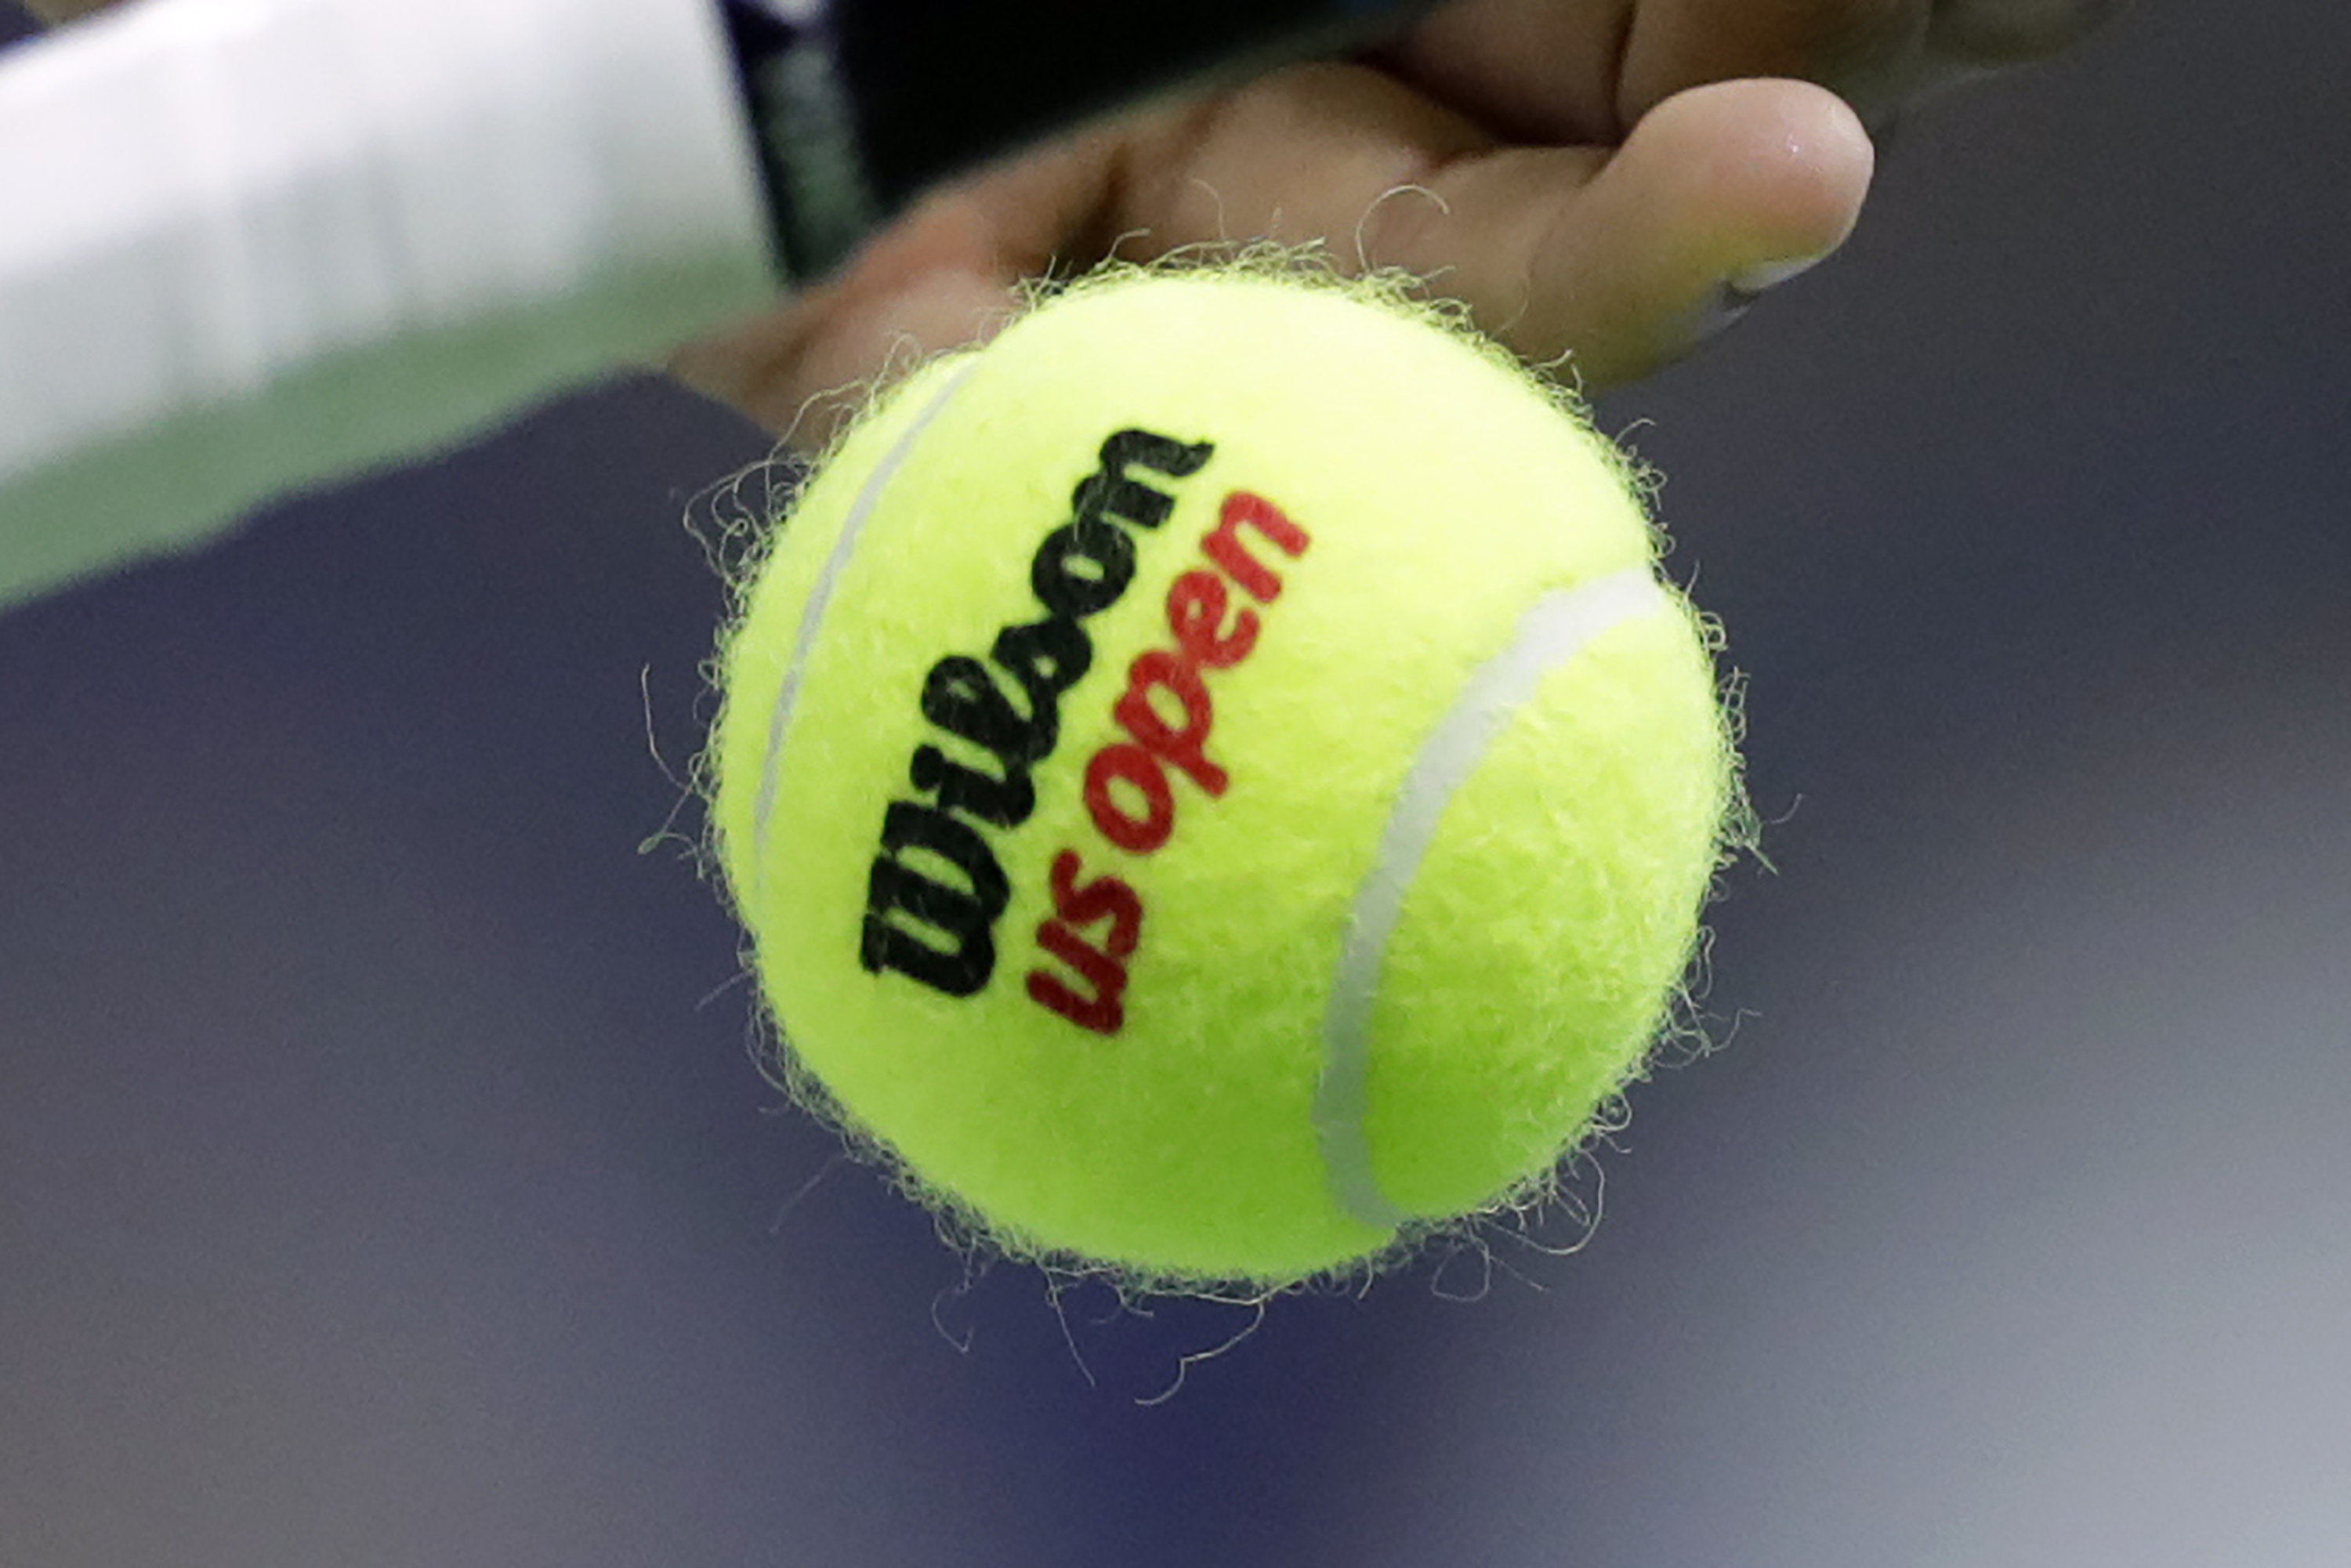 tennis live streaming 2021 us open